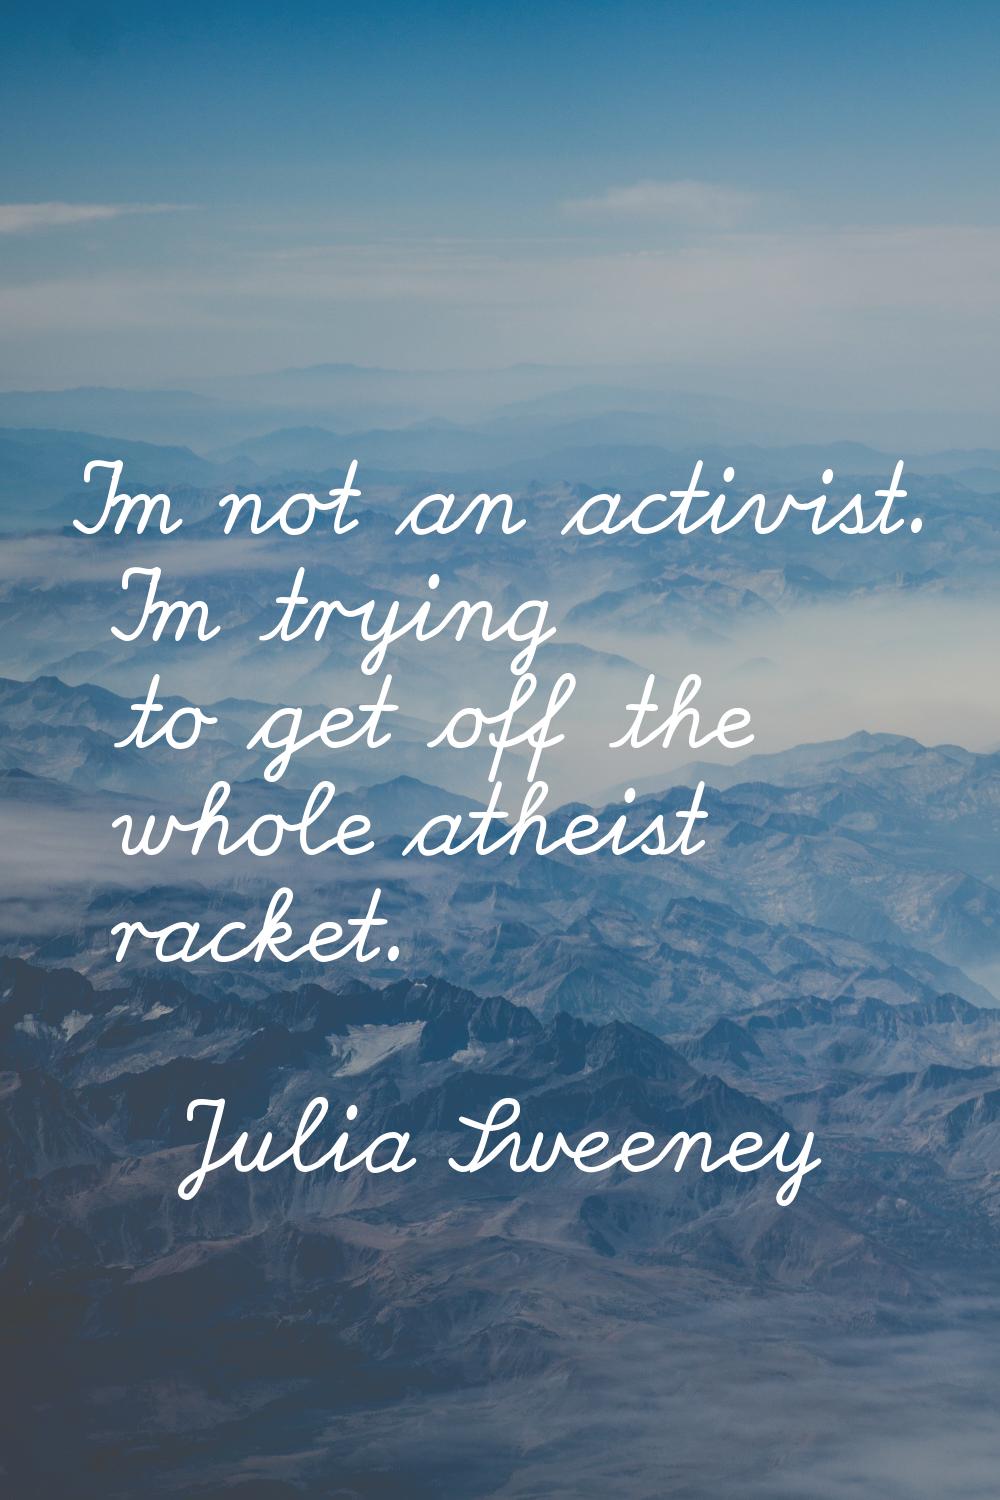 I'm not an activist. I'm trying to get off the whole atheist racket.